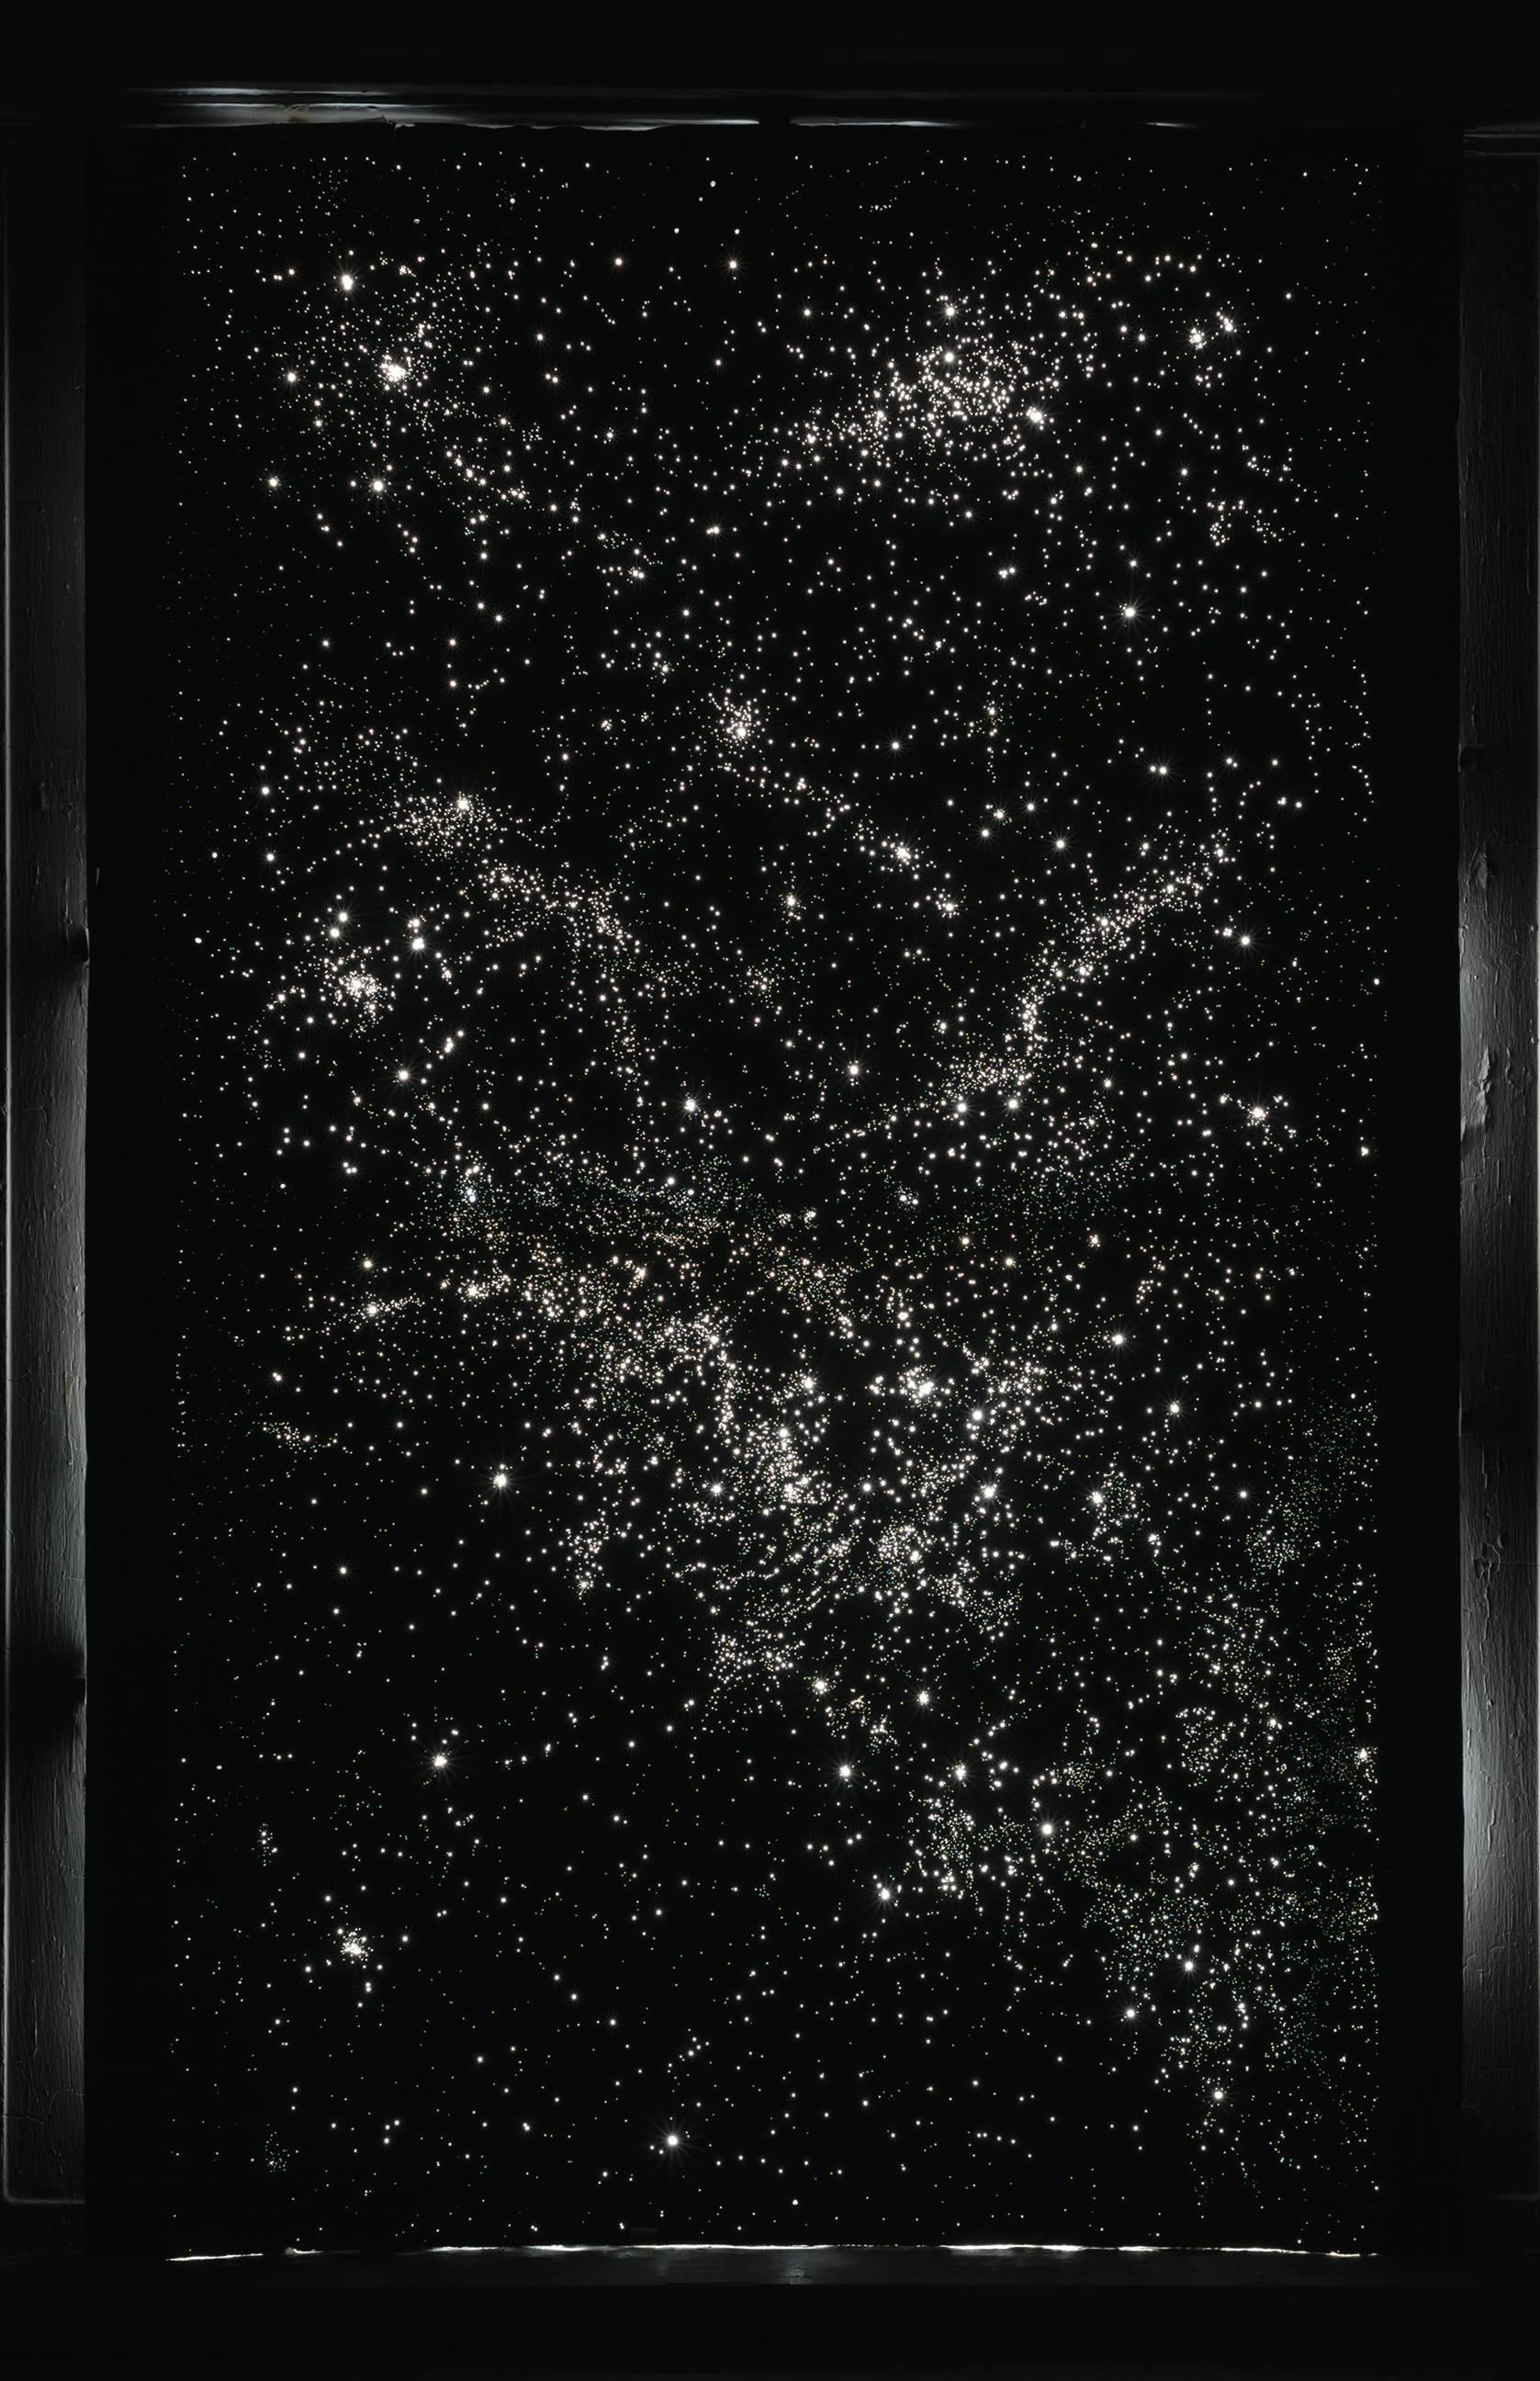 In Night and Day, Julia Randall uses pin-pricked black photography paper to reproduce the alignment of the cosmos viewed from a window at the moment of a deep personal experience. The is set into the small window, daylight illuminating the page from